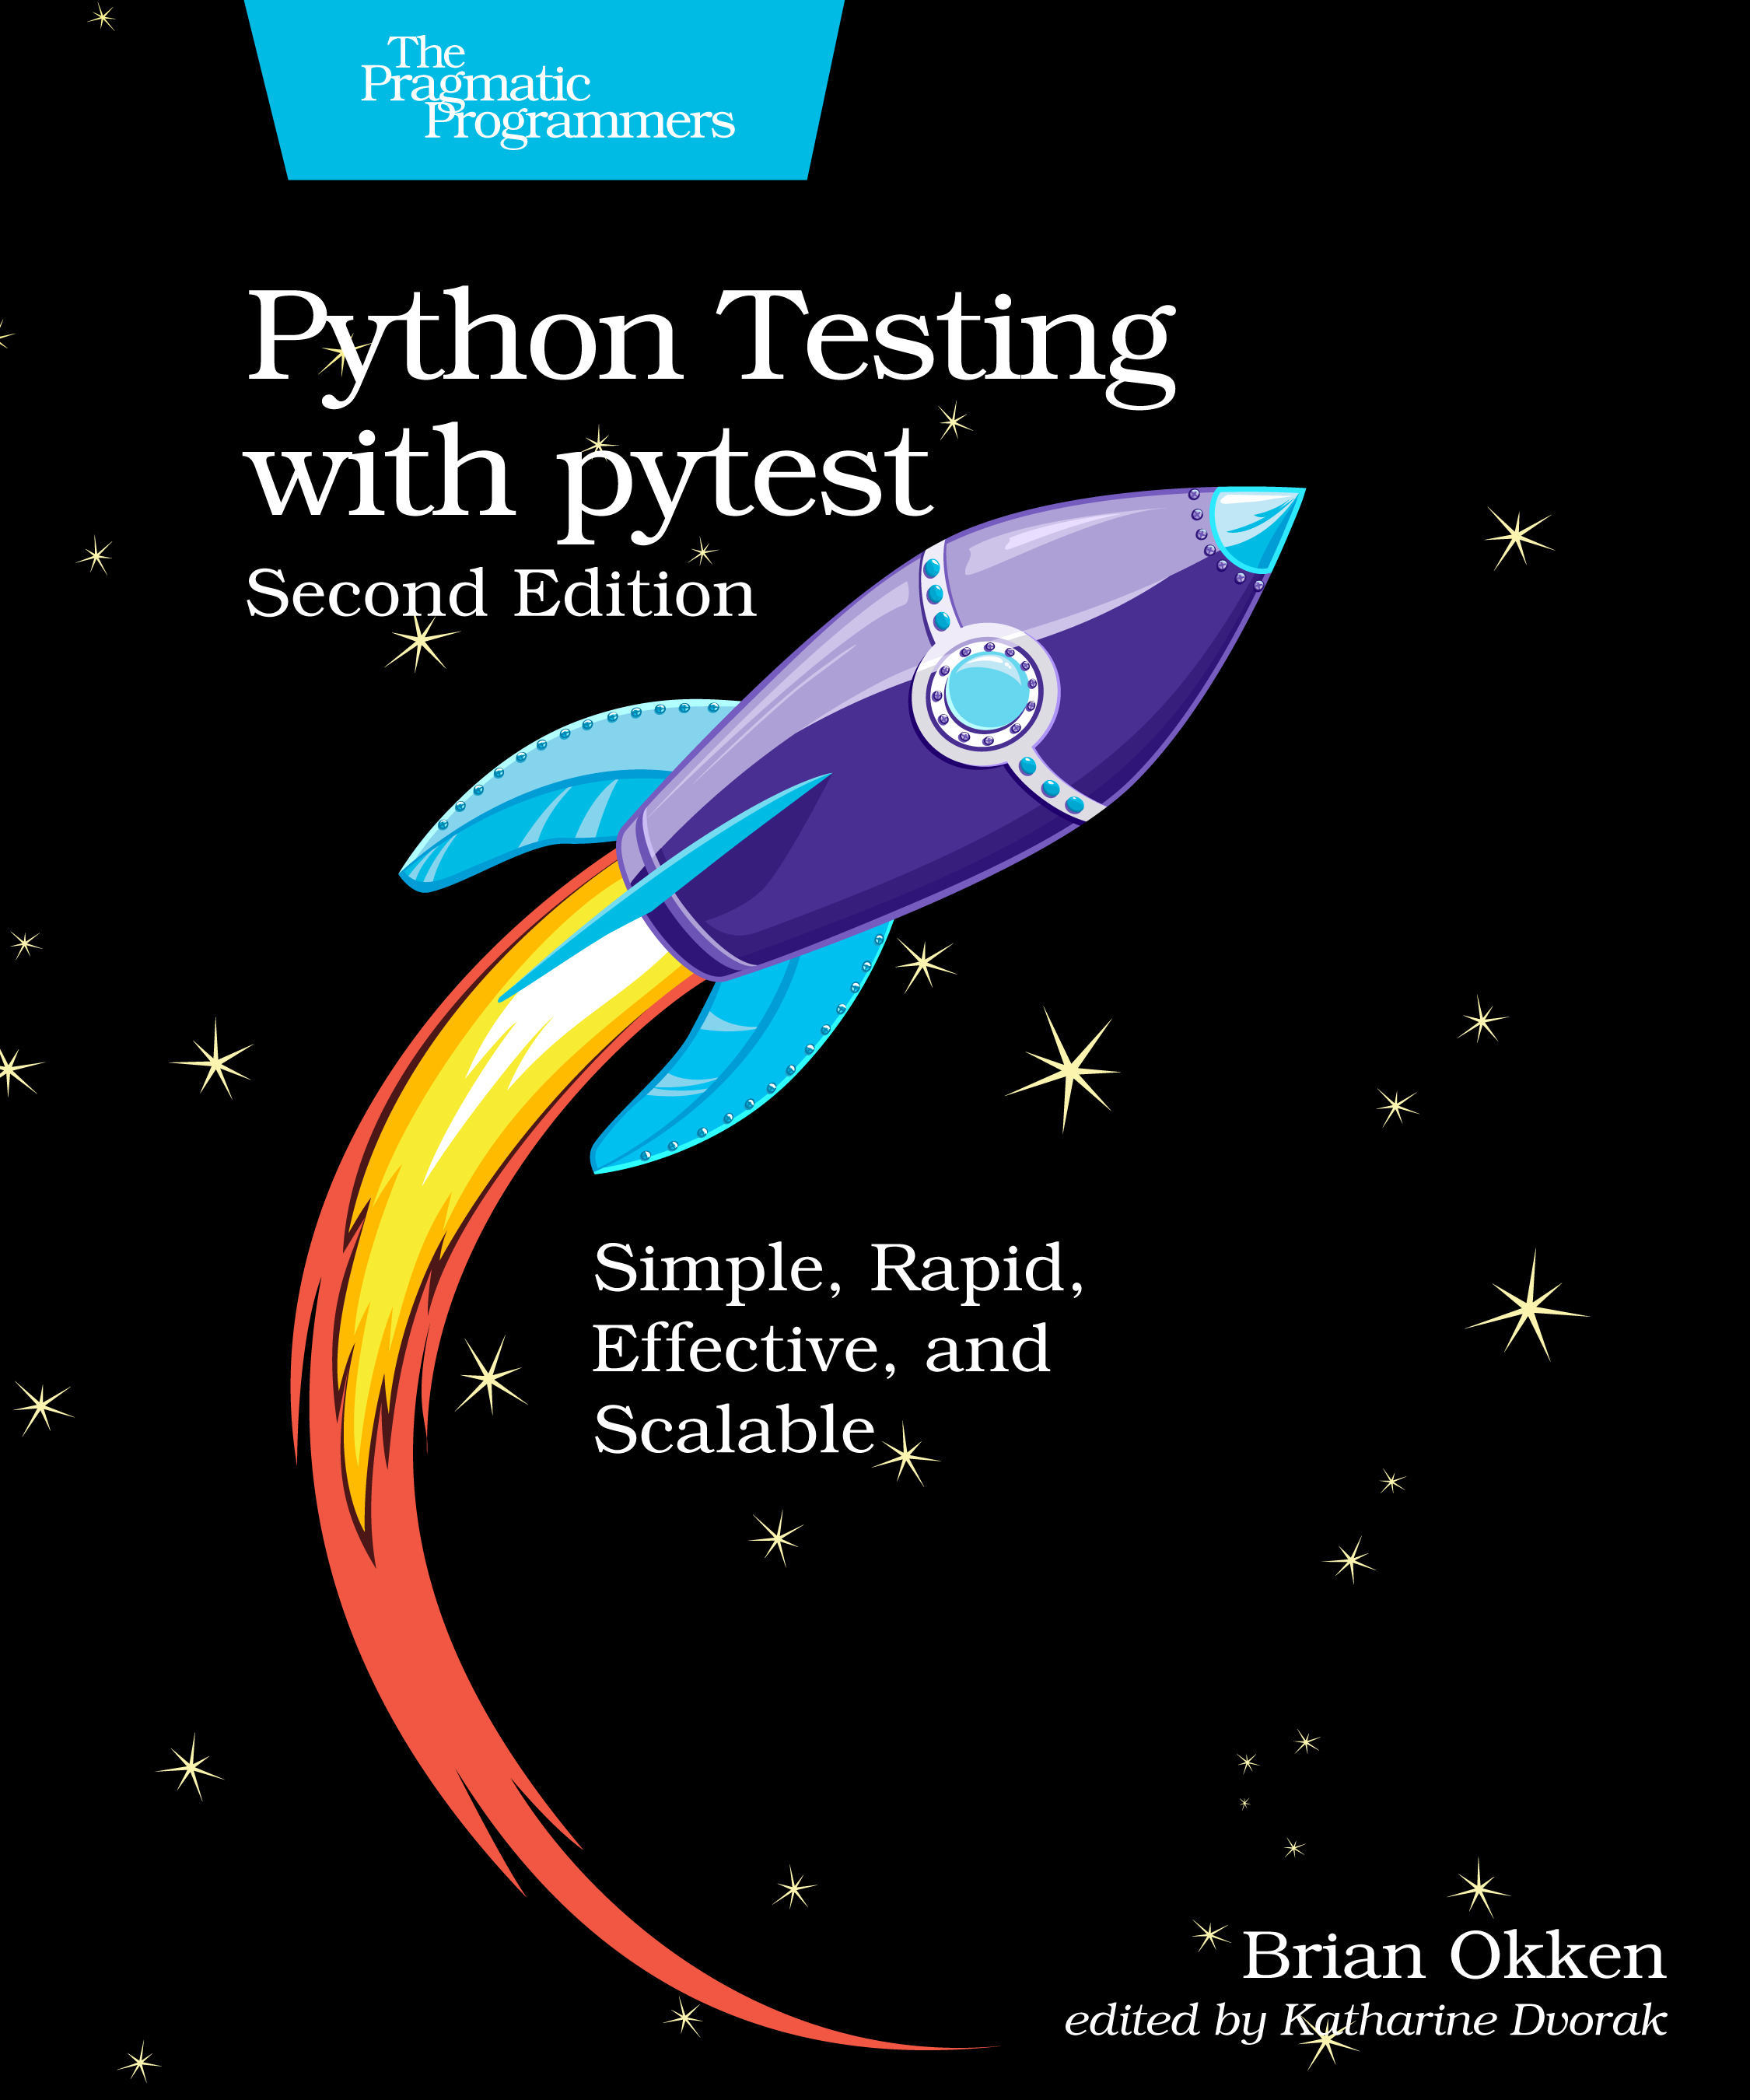 Python Testing with pytest, Second Edition: Simple, Rapid